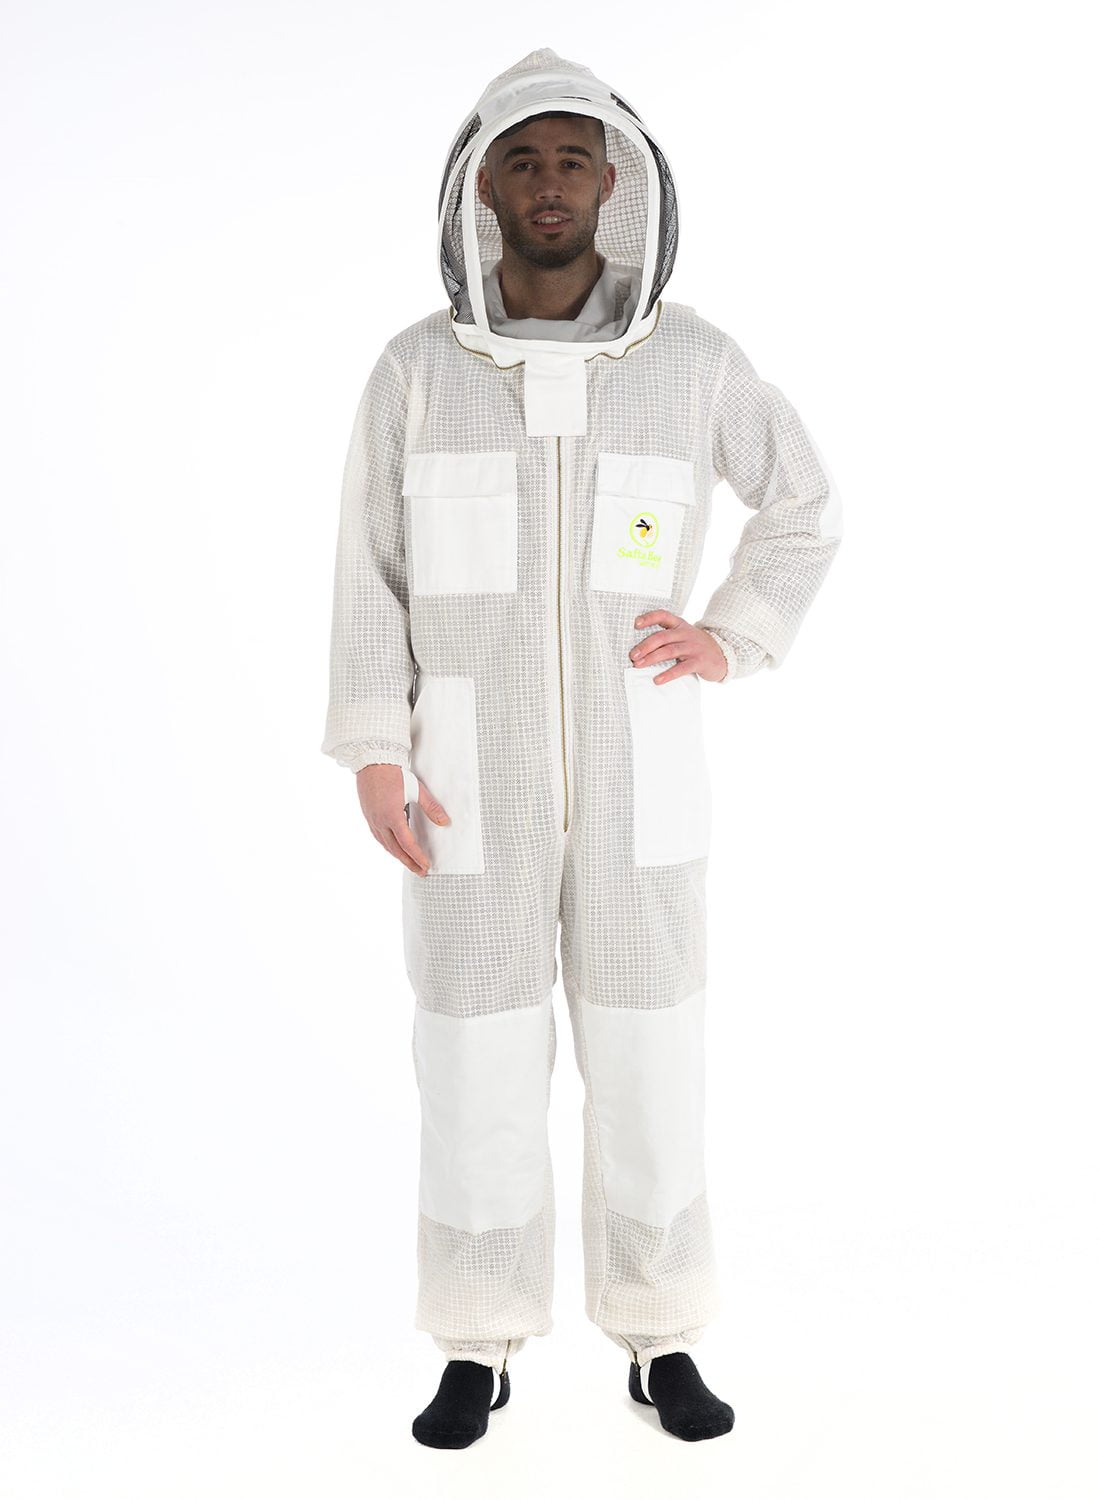 Details about   Pilot Beekeeping Suit Ultra Ventilated 3 Layer Extra Ordinary Features Size S 